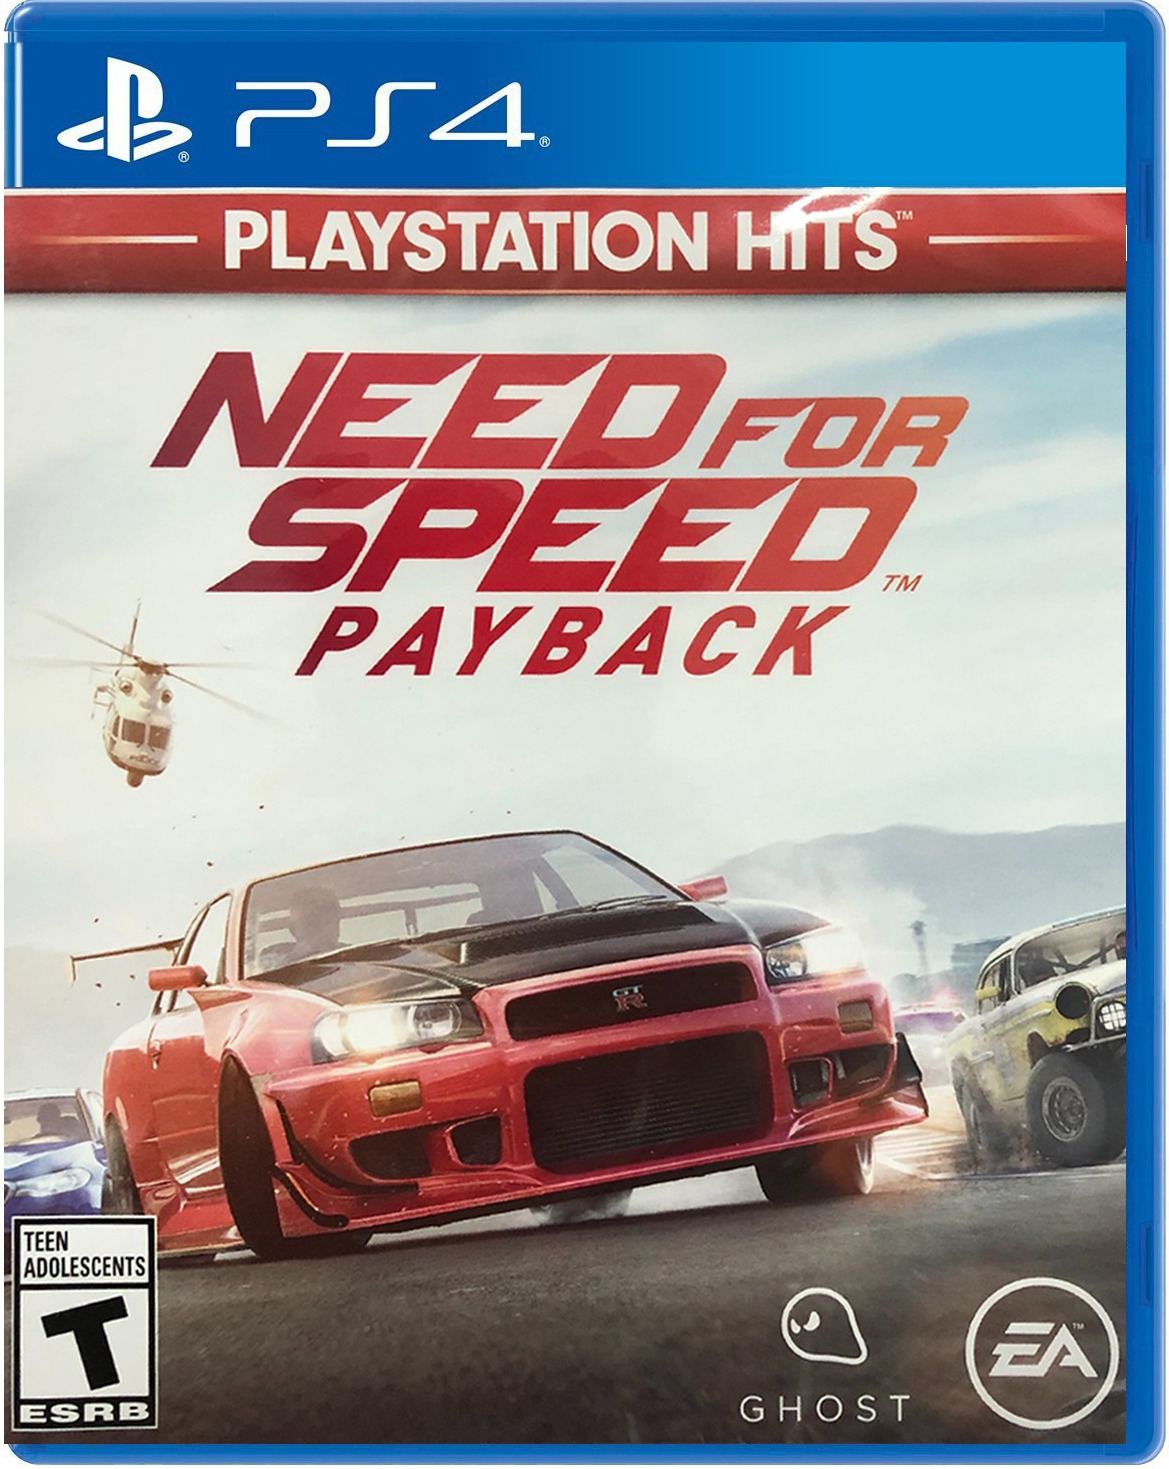 need for speed payback cheats pc